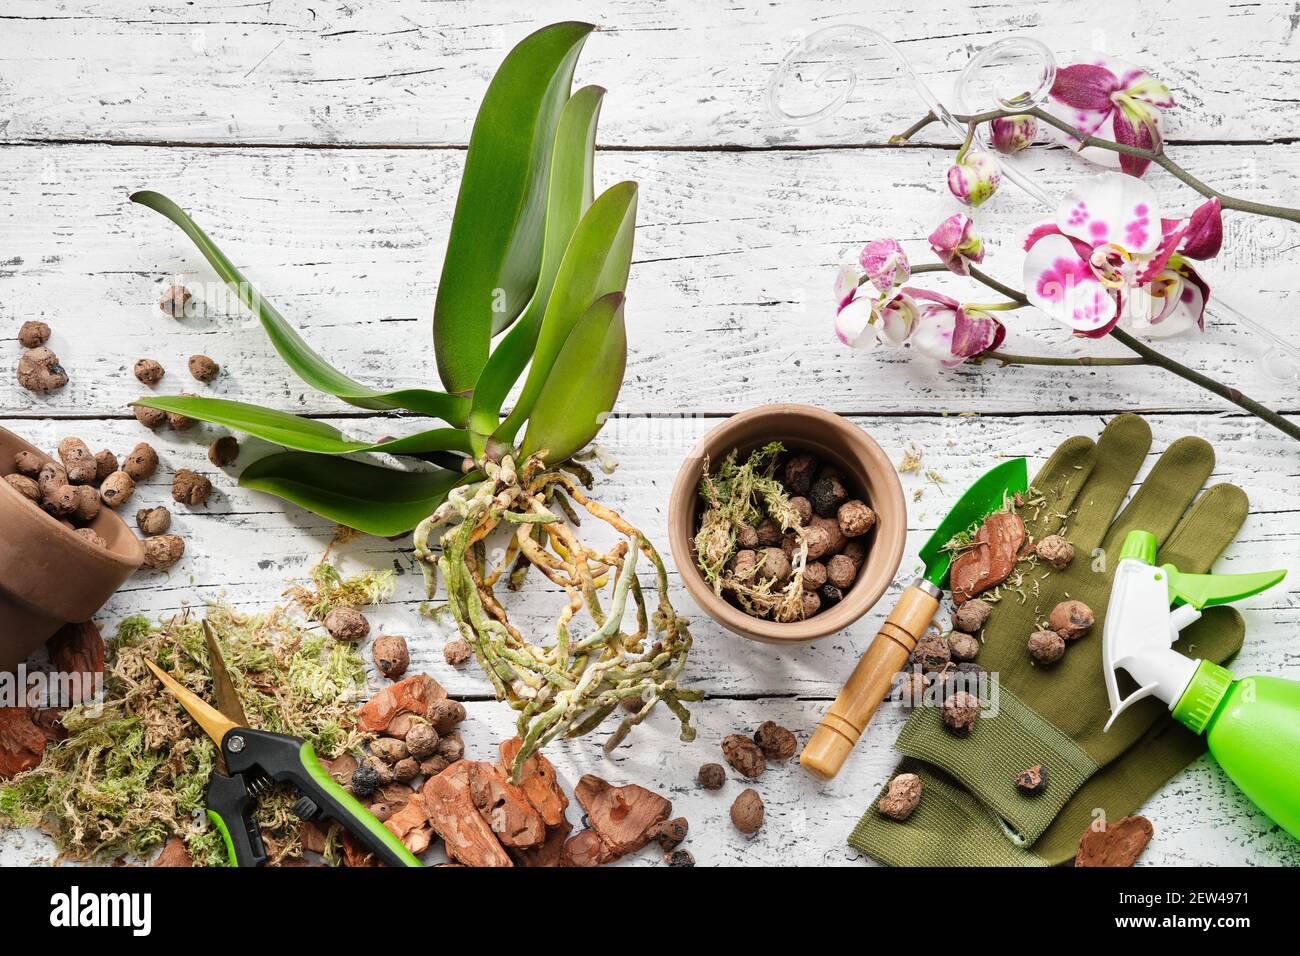 Flowerpots, pine bark, expanded clay, moss and shovel for planting orchids in a pot, spray bottle and garden pruner on table. Top view. Stock Photo